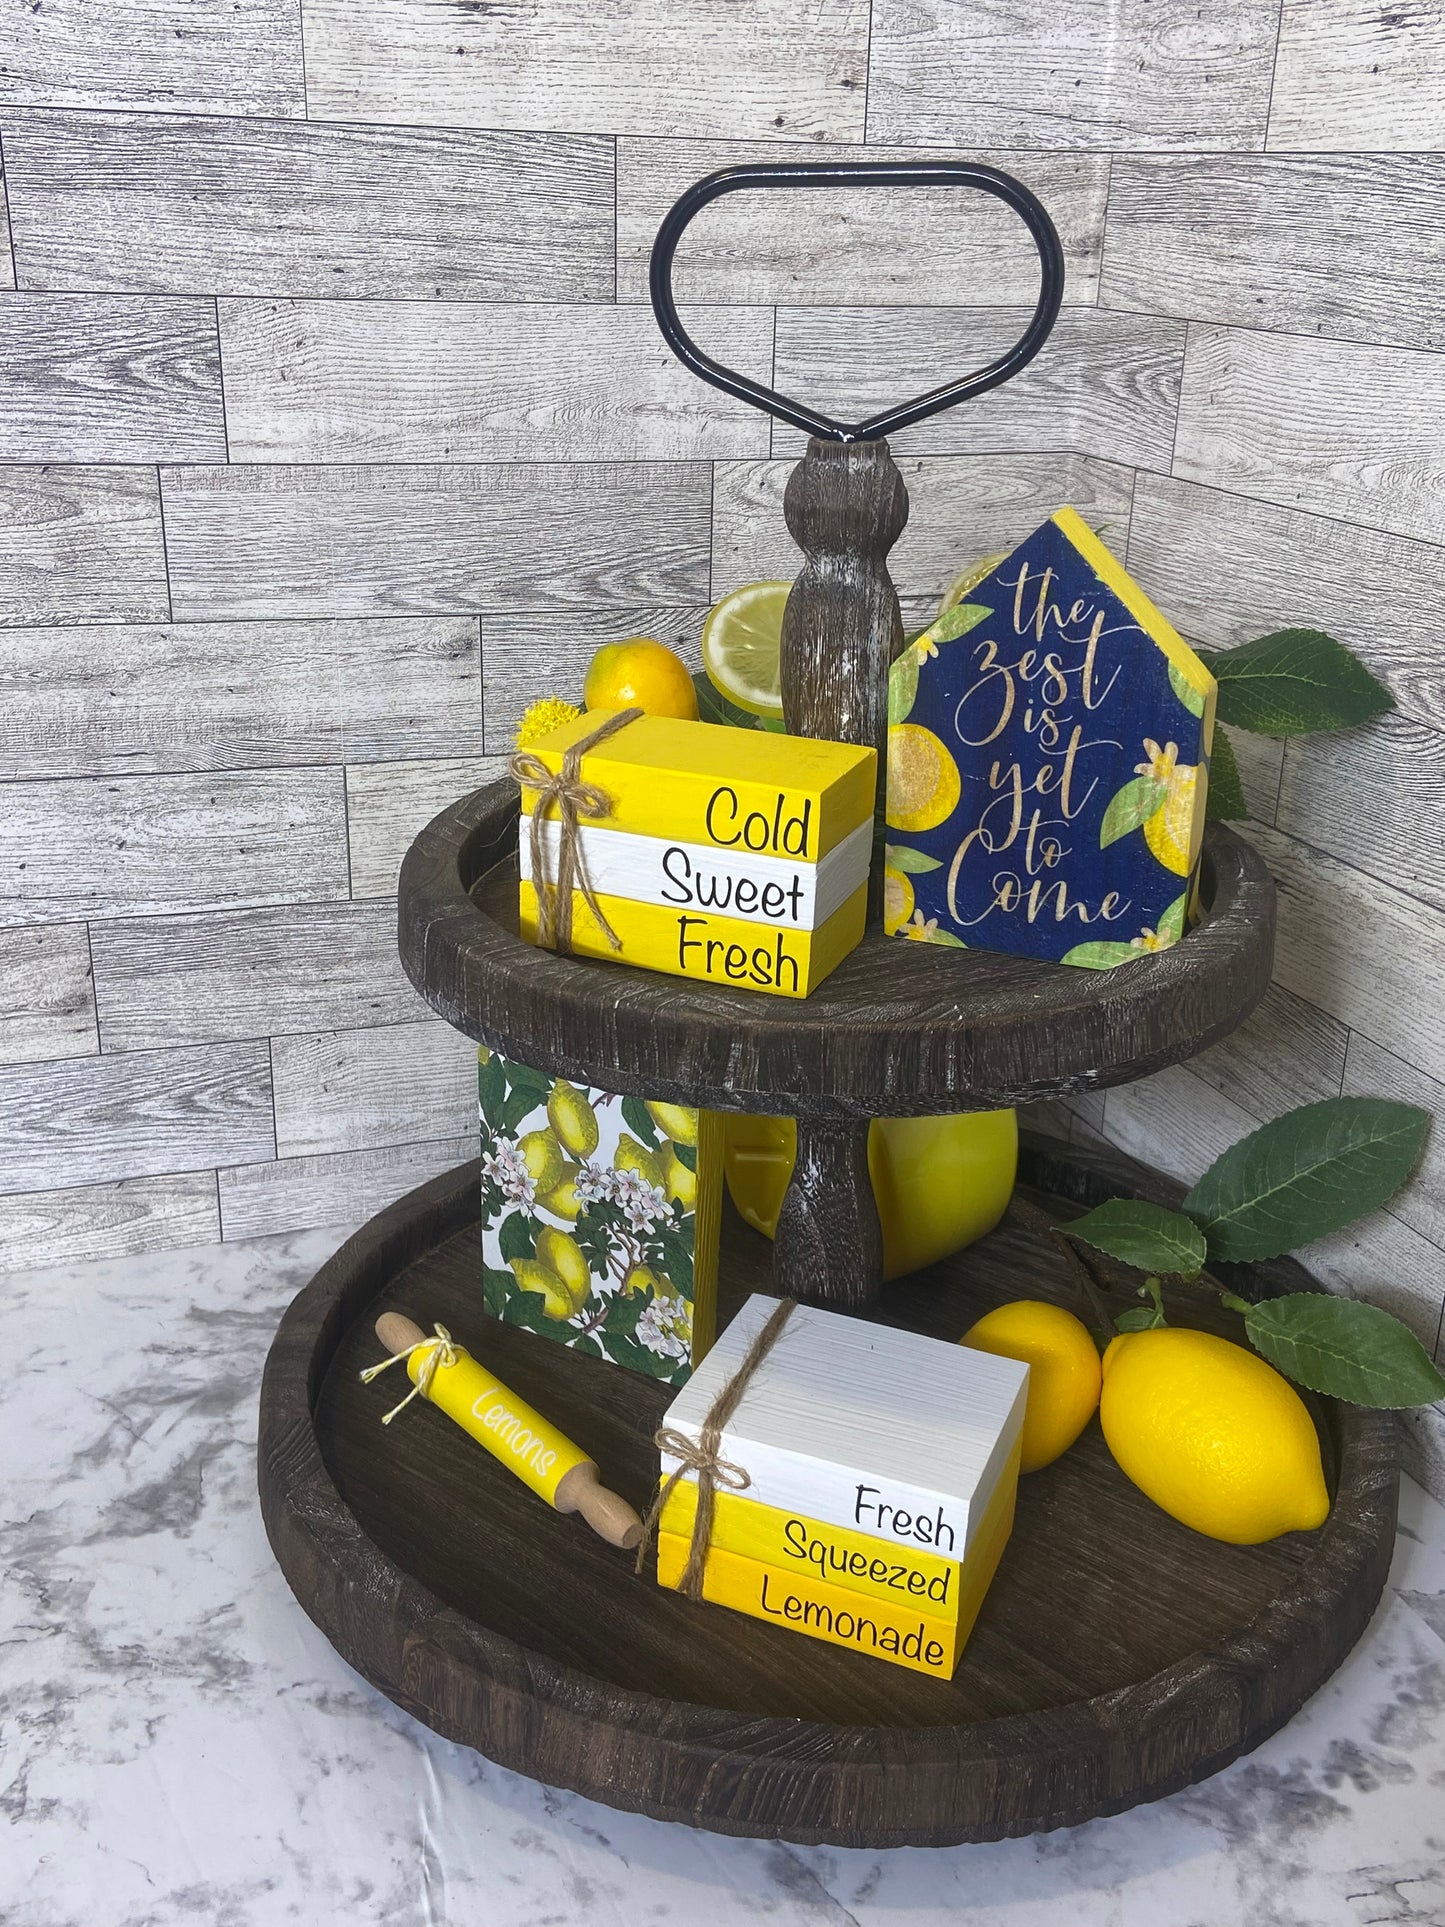 Fresh Squeezed Lemonade- Medium Tiered Tray Book Stack